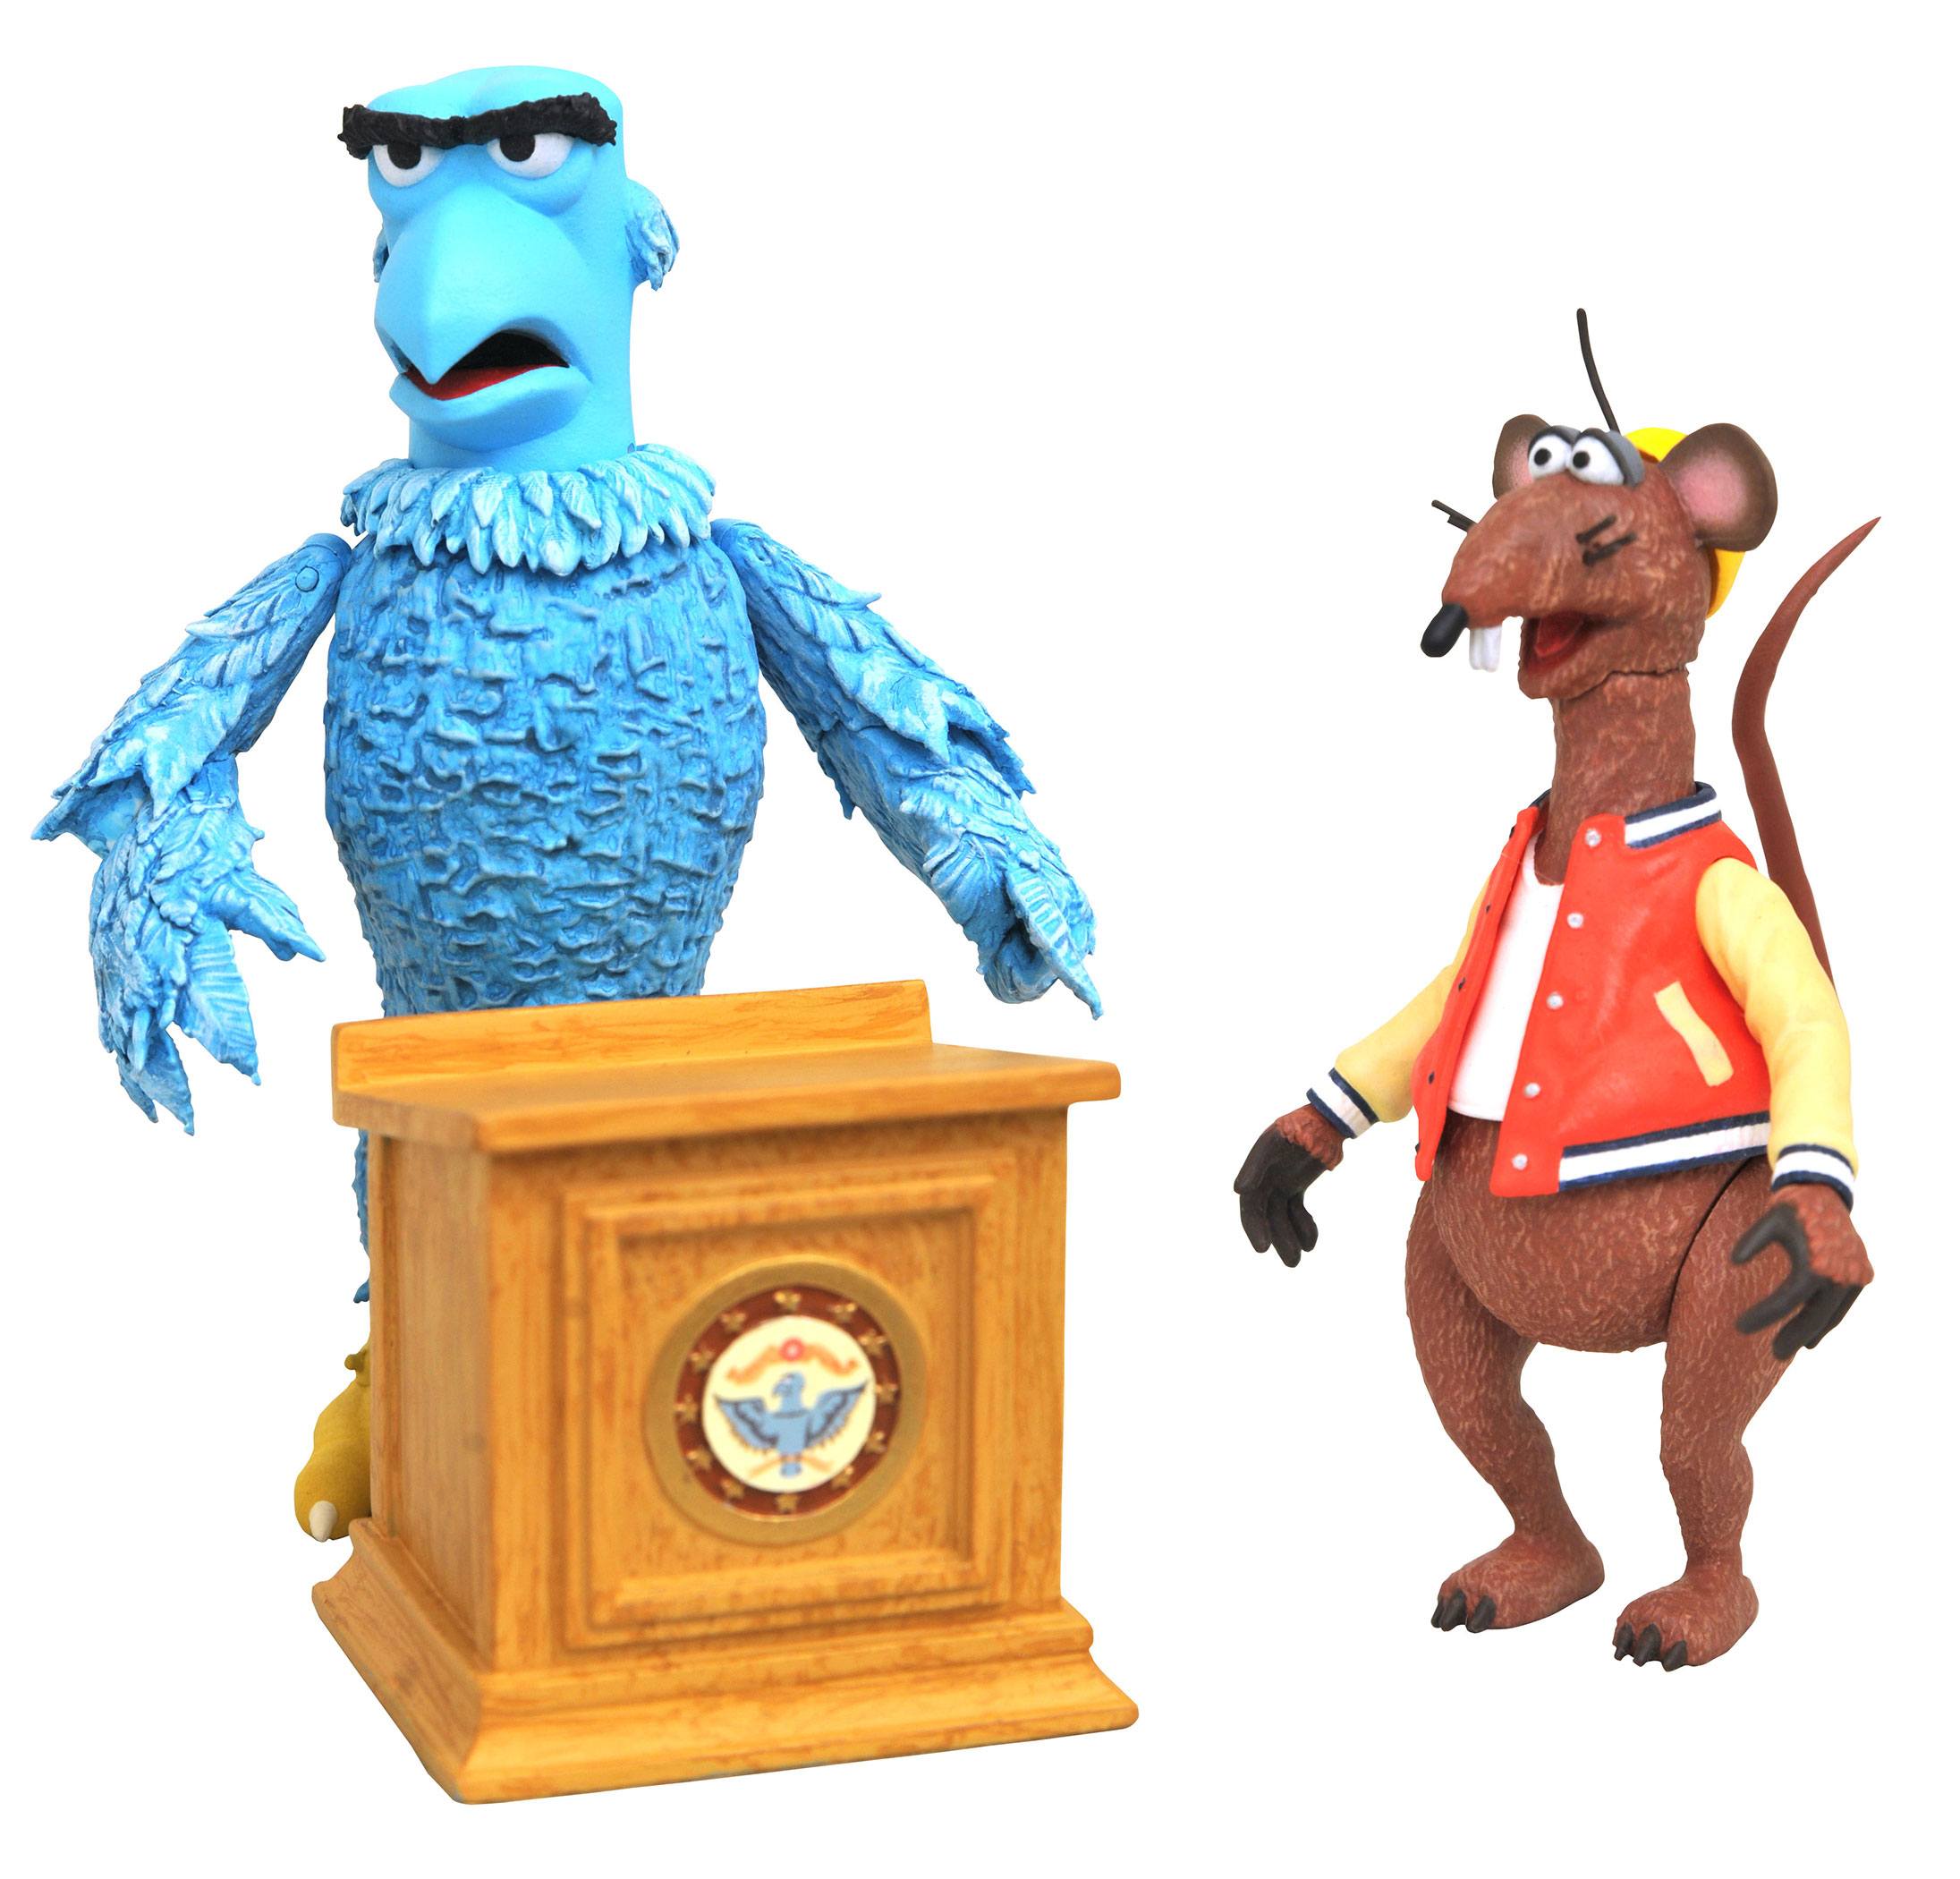 Die Muppets Select Actionfiguren Doppelpack Sam the Eagle & Rizzo the Rat 13 cm AUG212424 699788814833